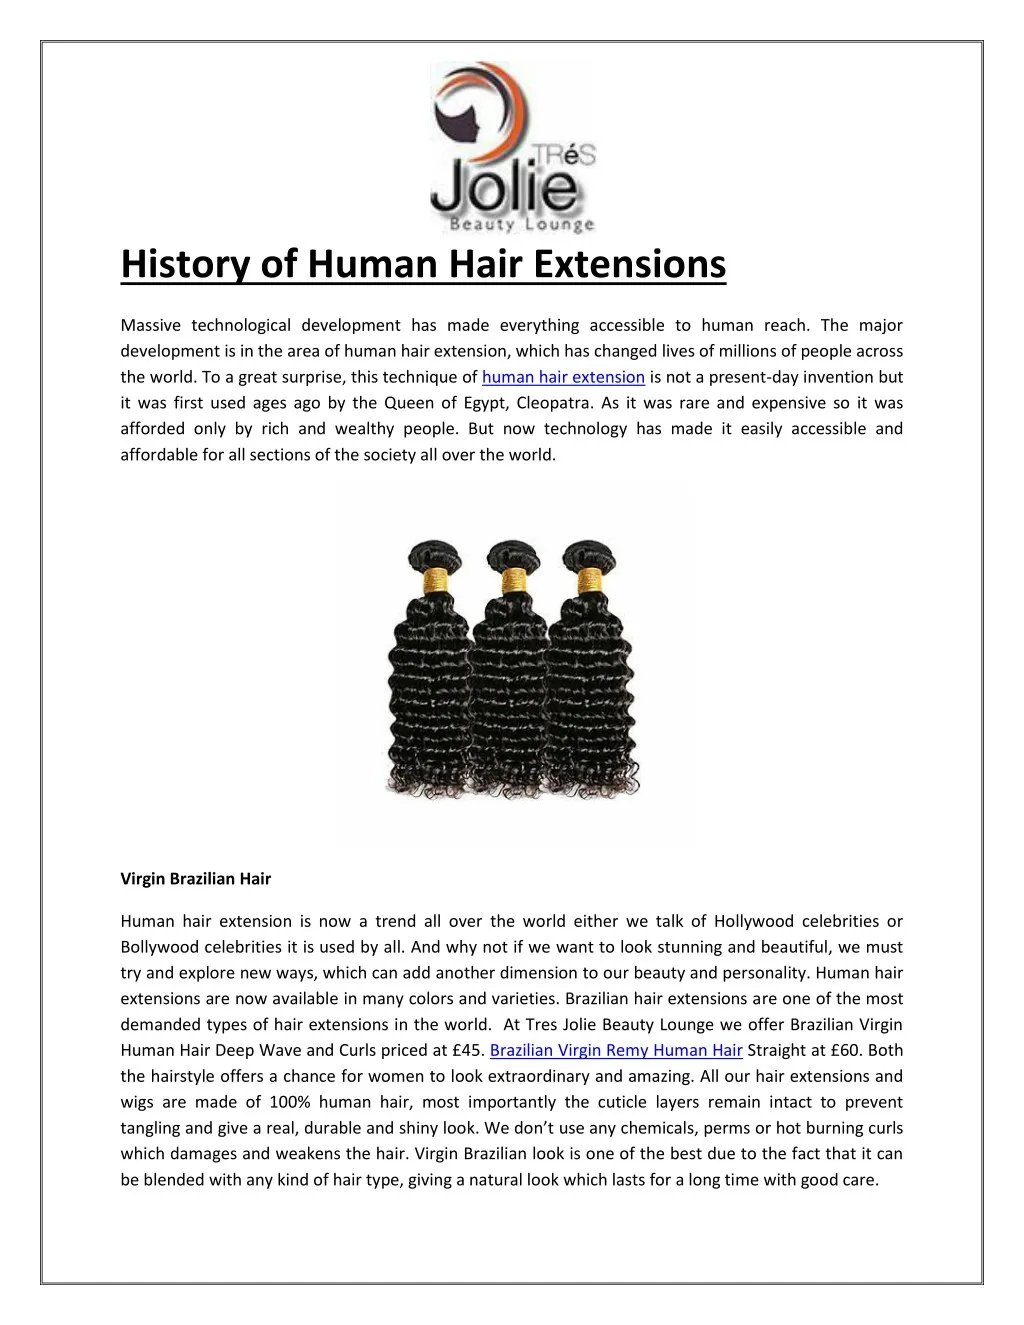 history of human hair extensions